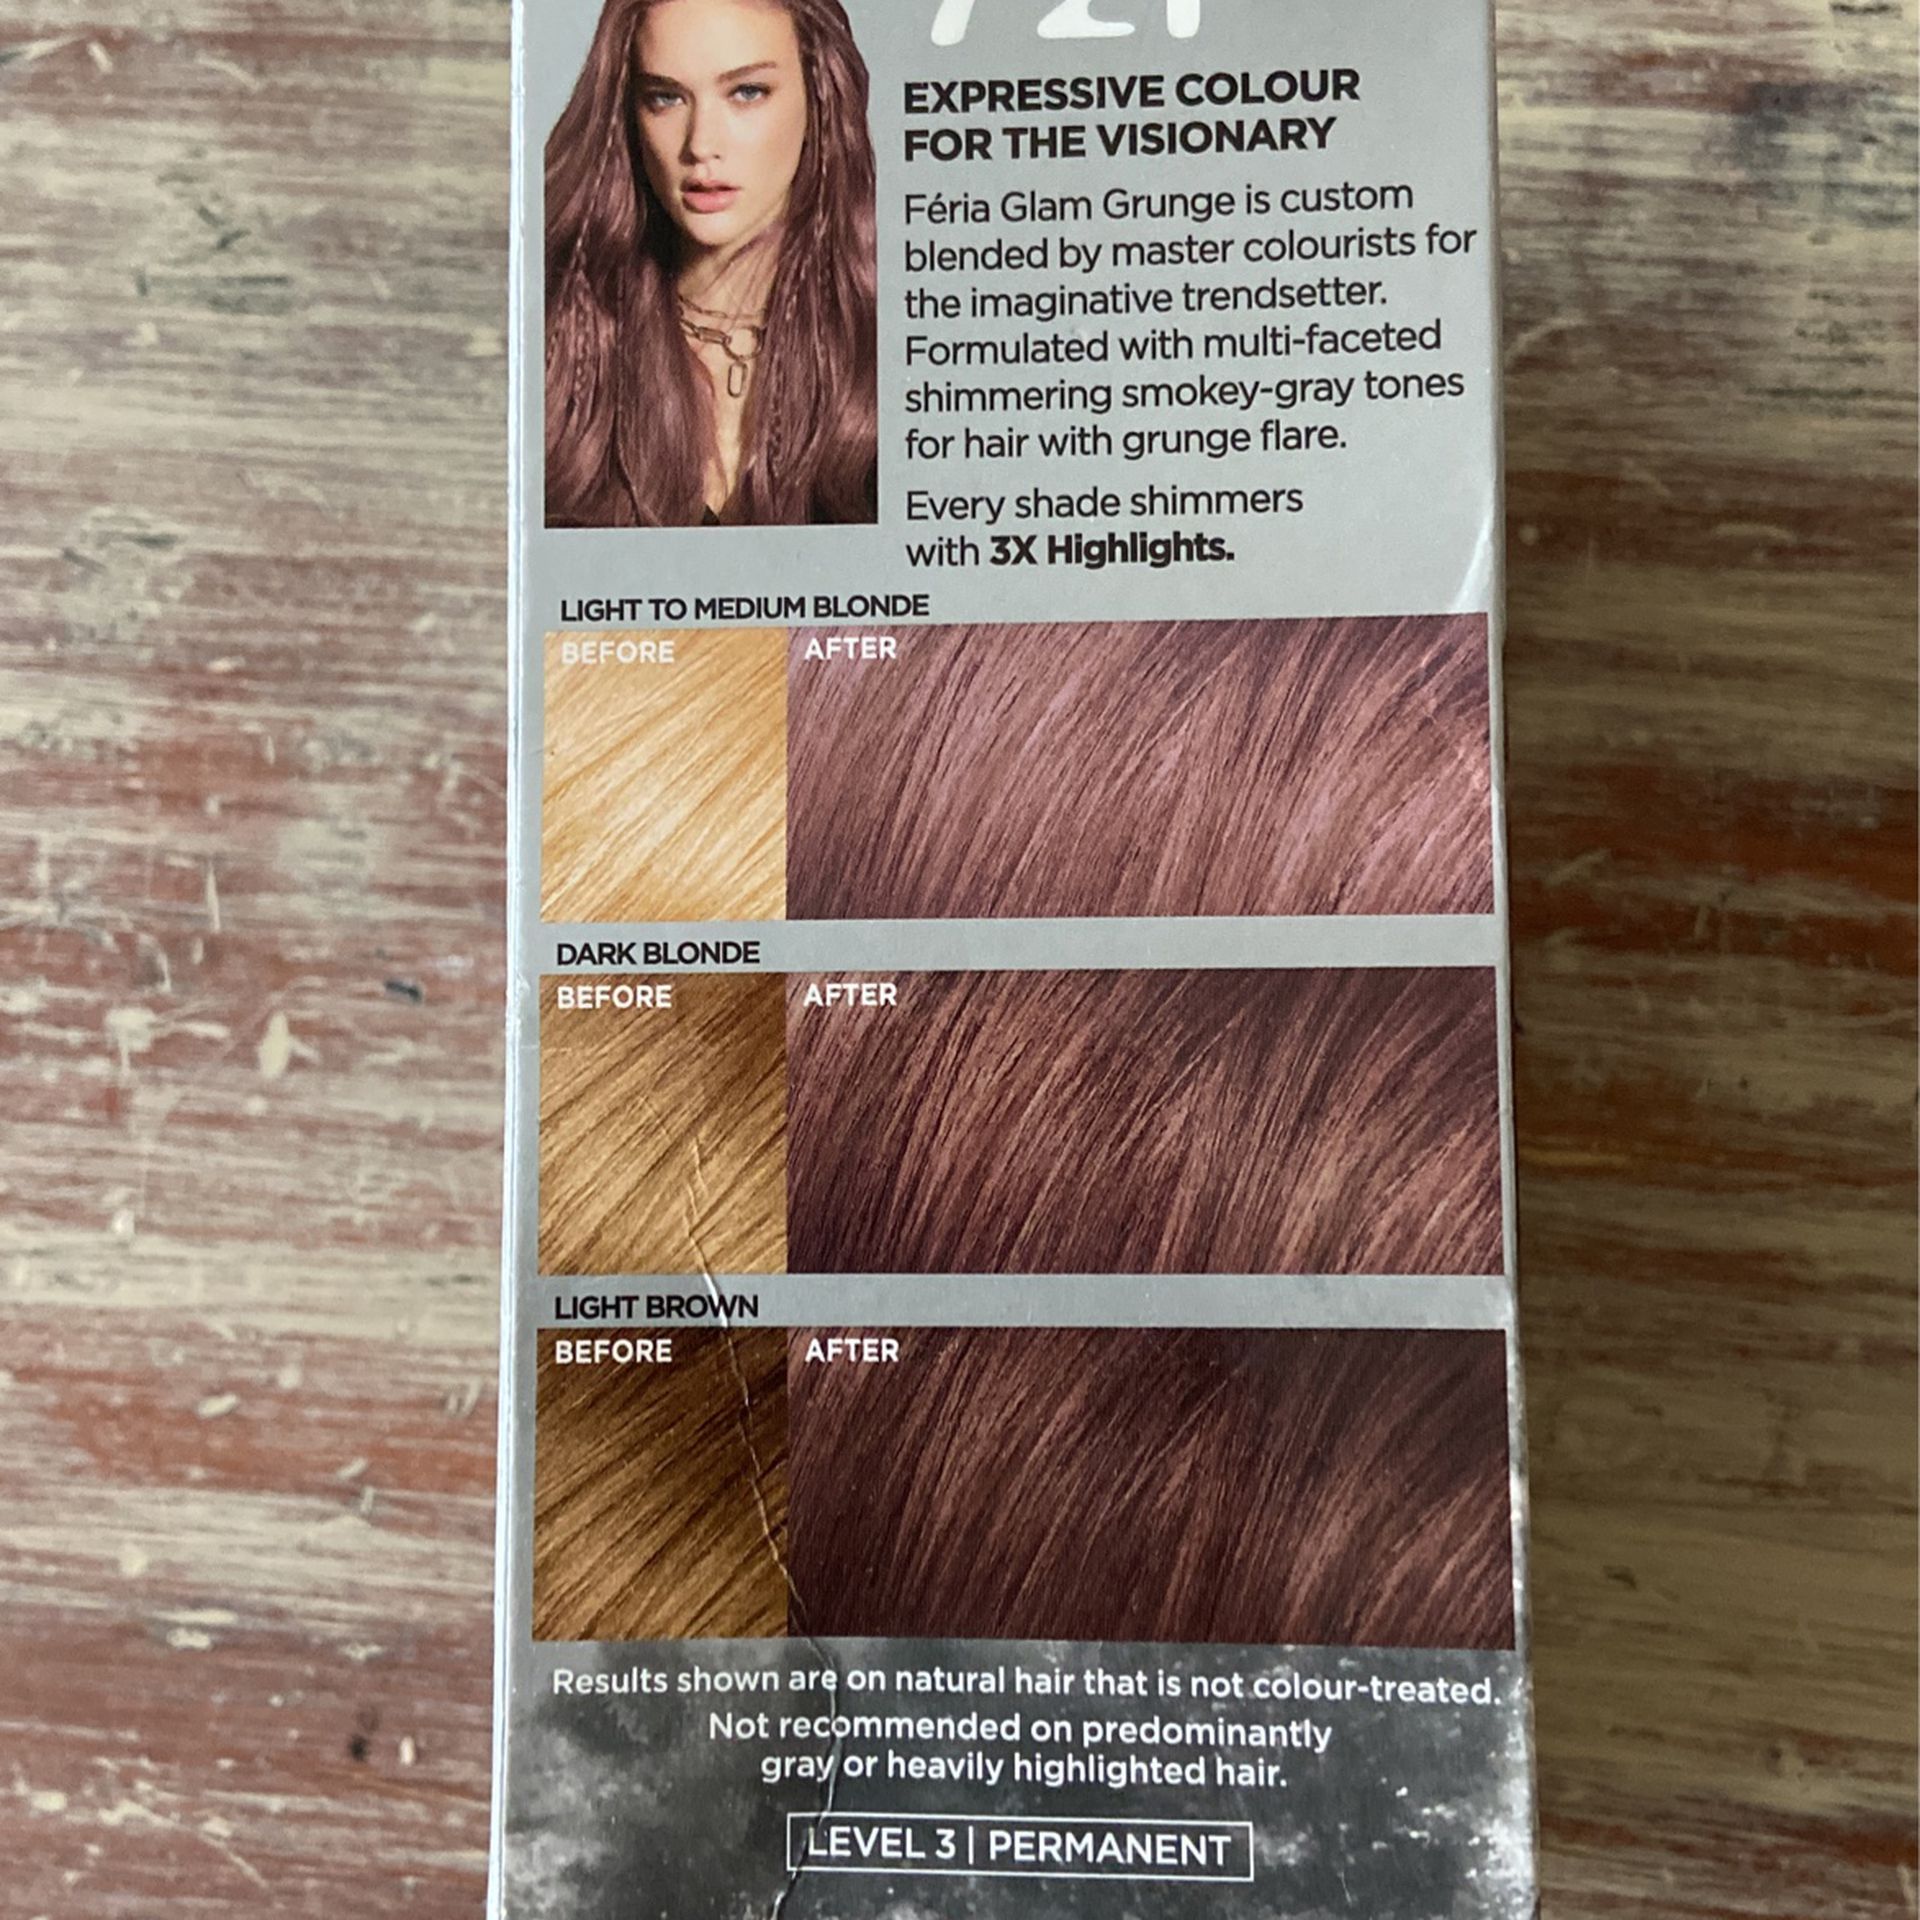 Loreal Feria Glam Grunge Dusty Mauve 721 for Sale in W Colls, NJ - OfferUp